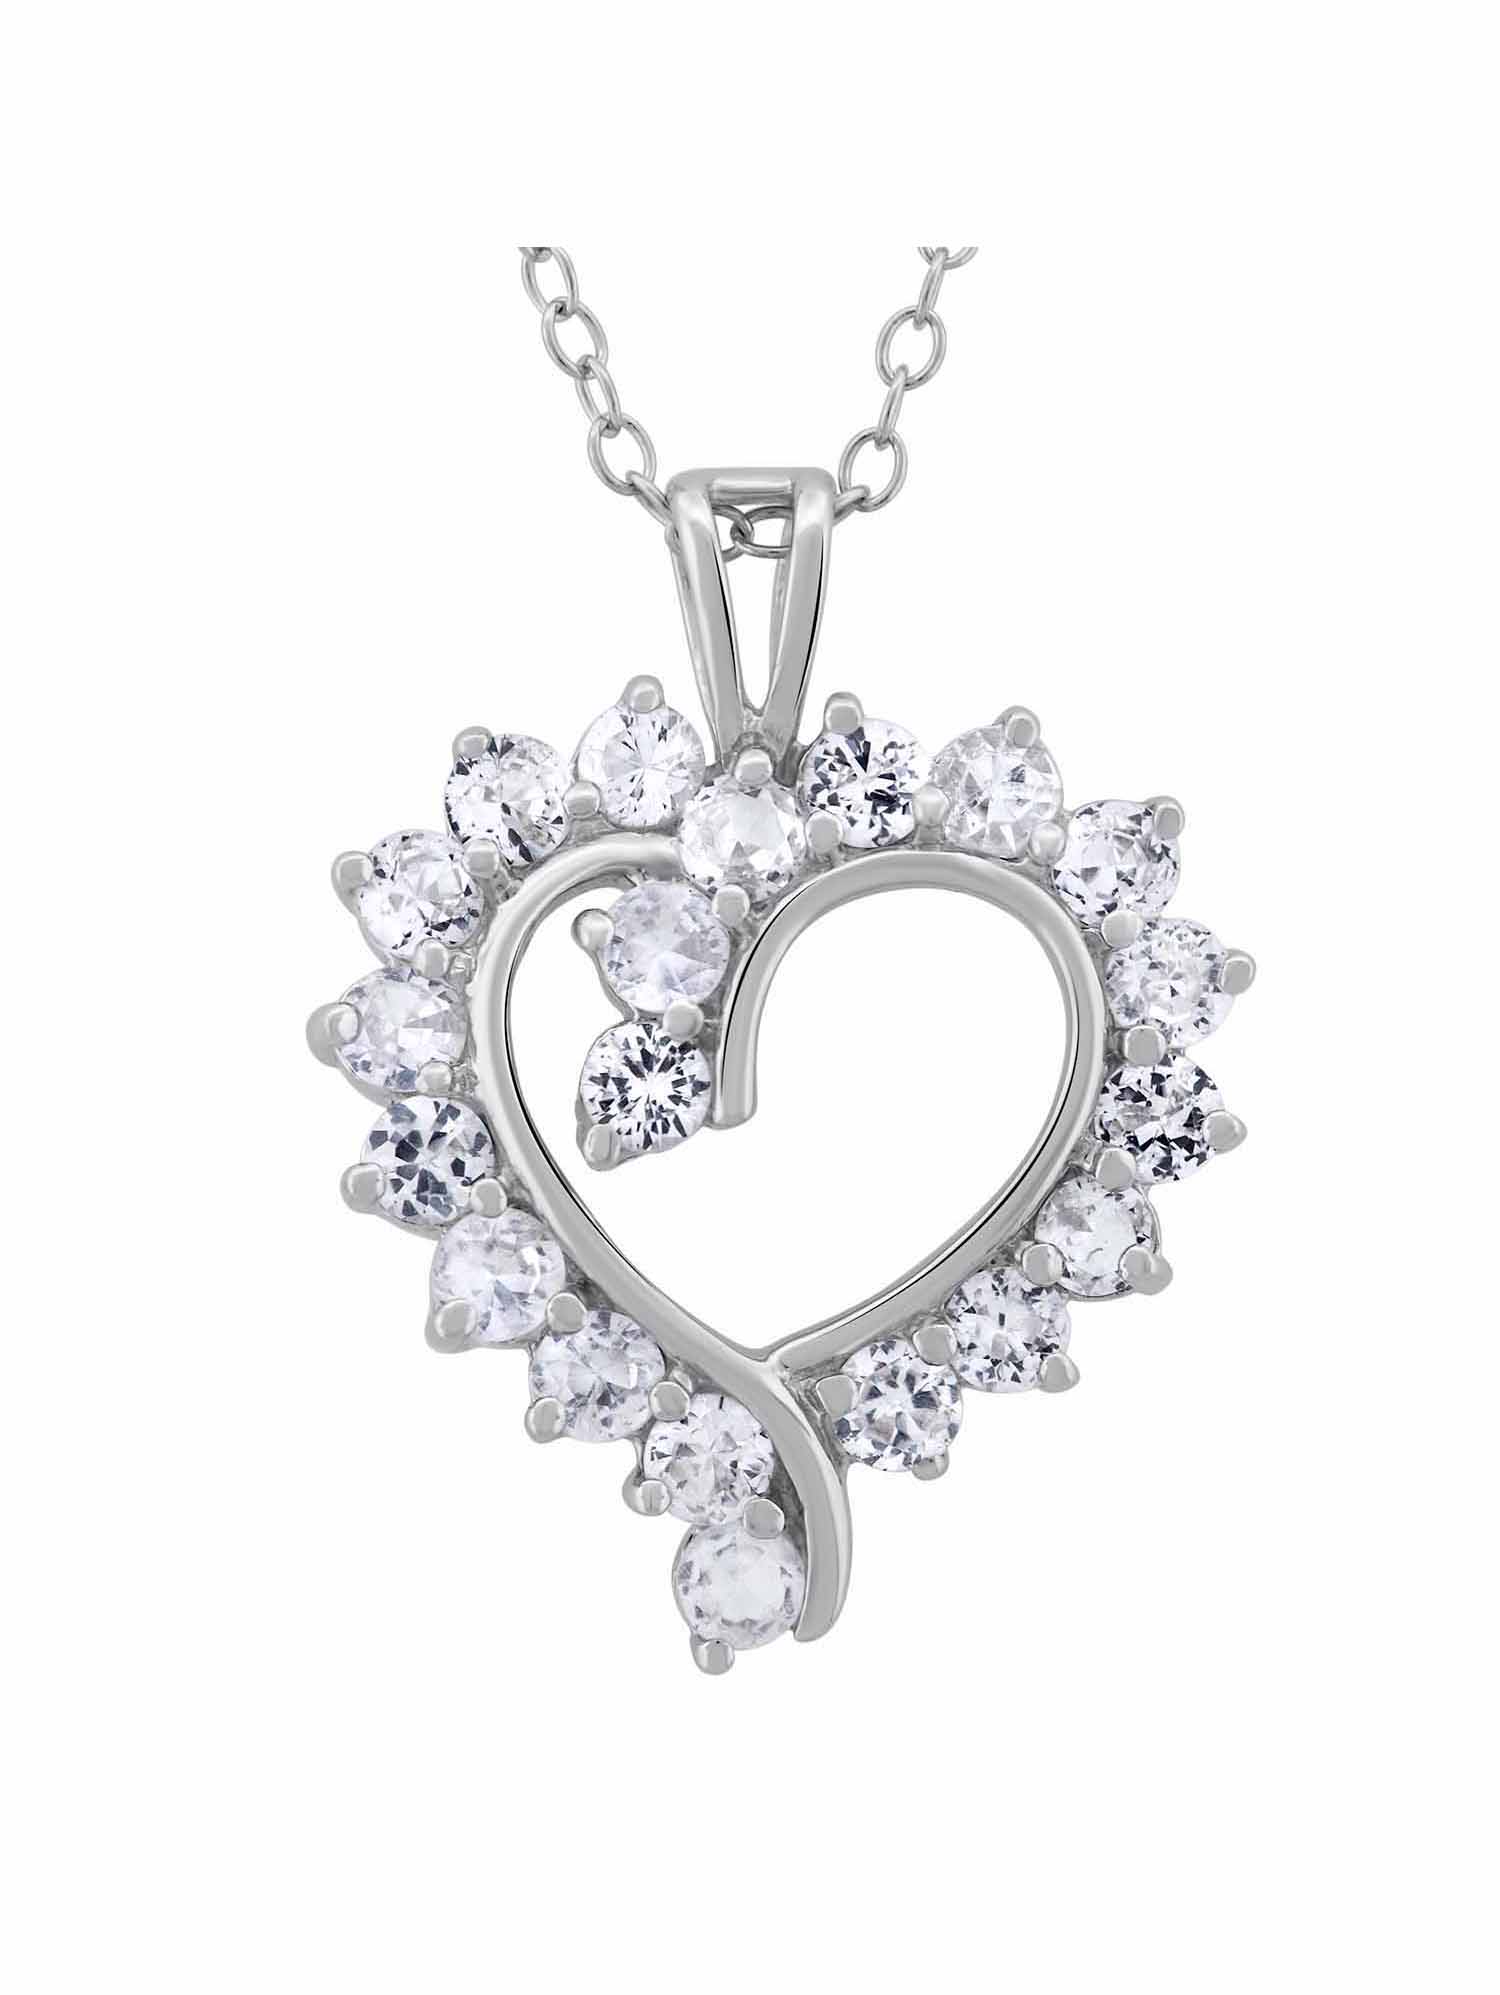 White CZ Sterling Silver Open Heart Pendant, 18" - image 1 of 1